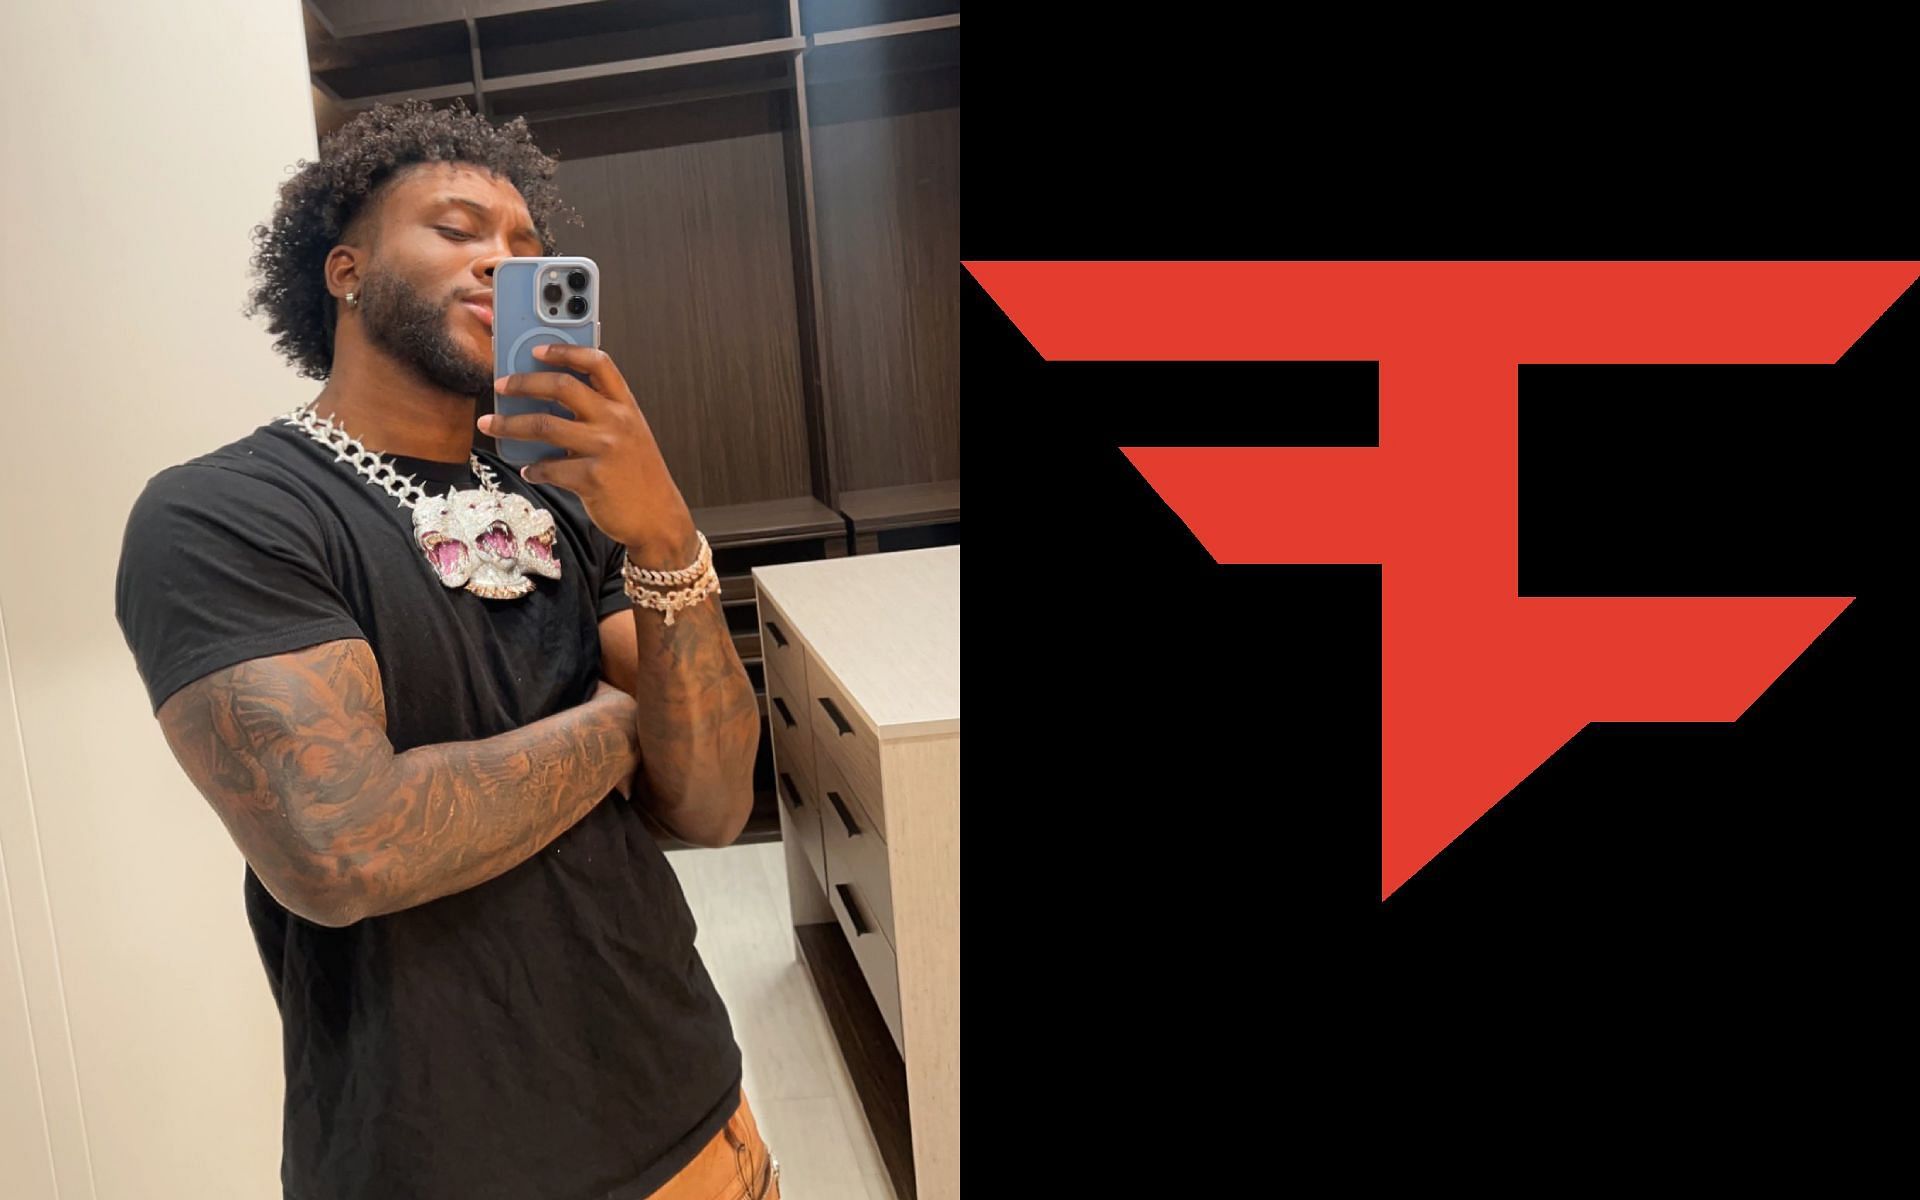 Twitch streamer YourRAGE discloses he had to &quot;get out&quot; of FaZe Clan house